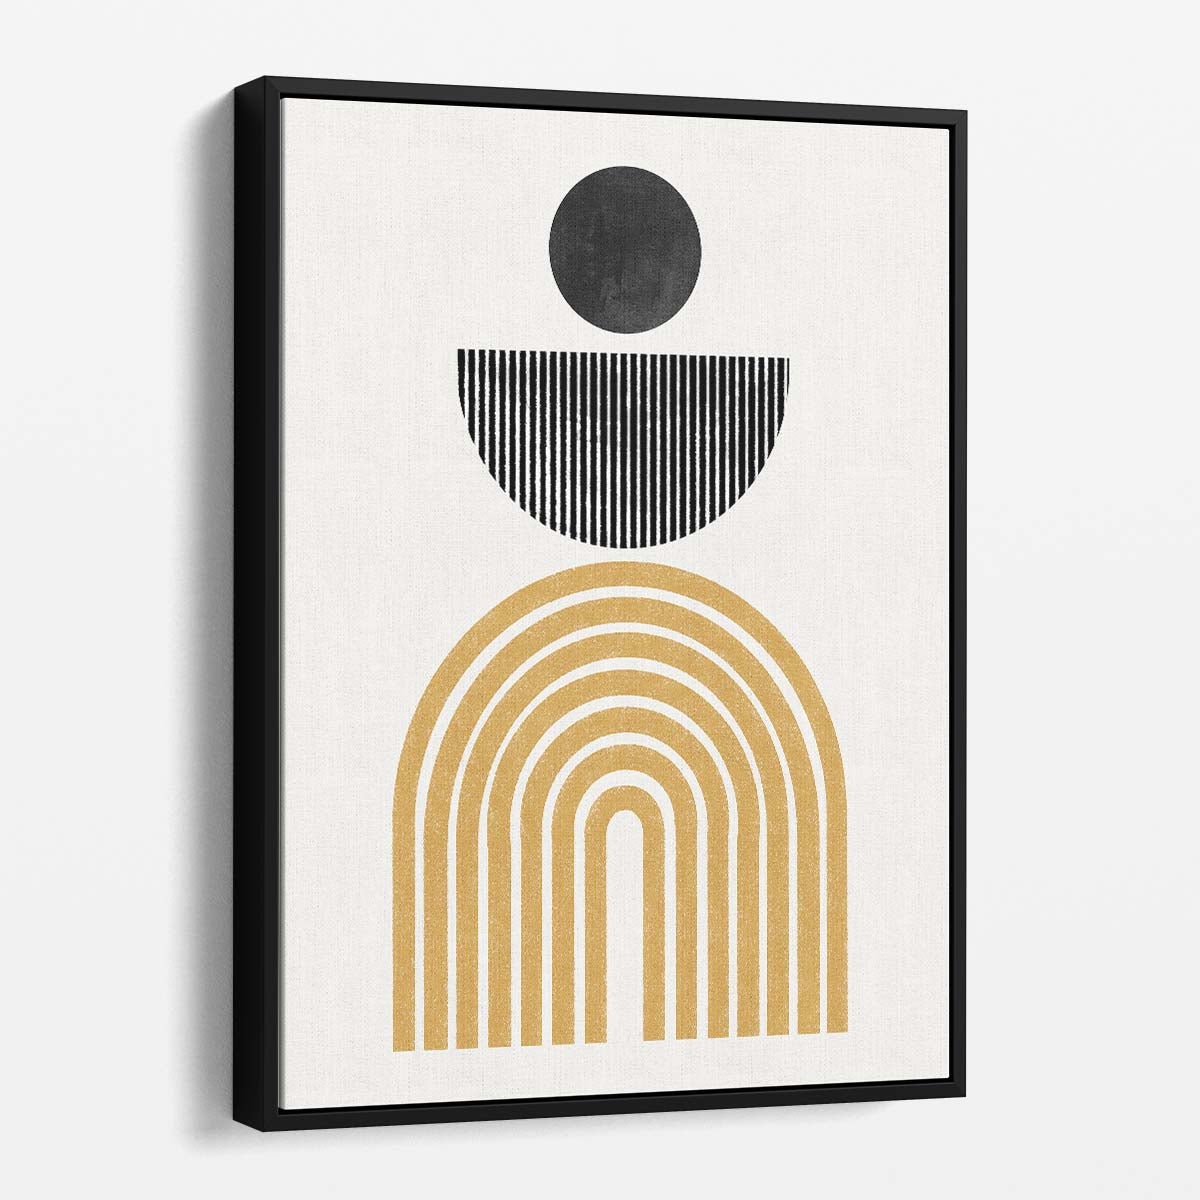 Mid-Century Geometric Abstract Illustration Art by MIUUS STUDIO by Luxuriance Designs, made in USA